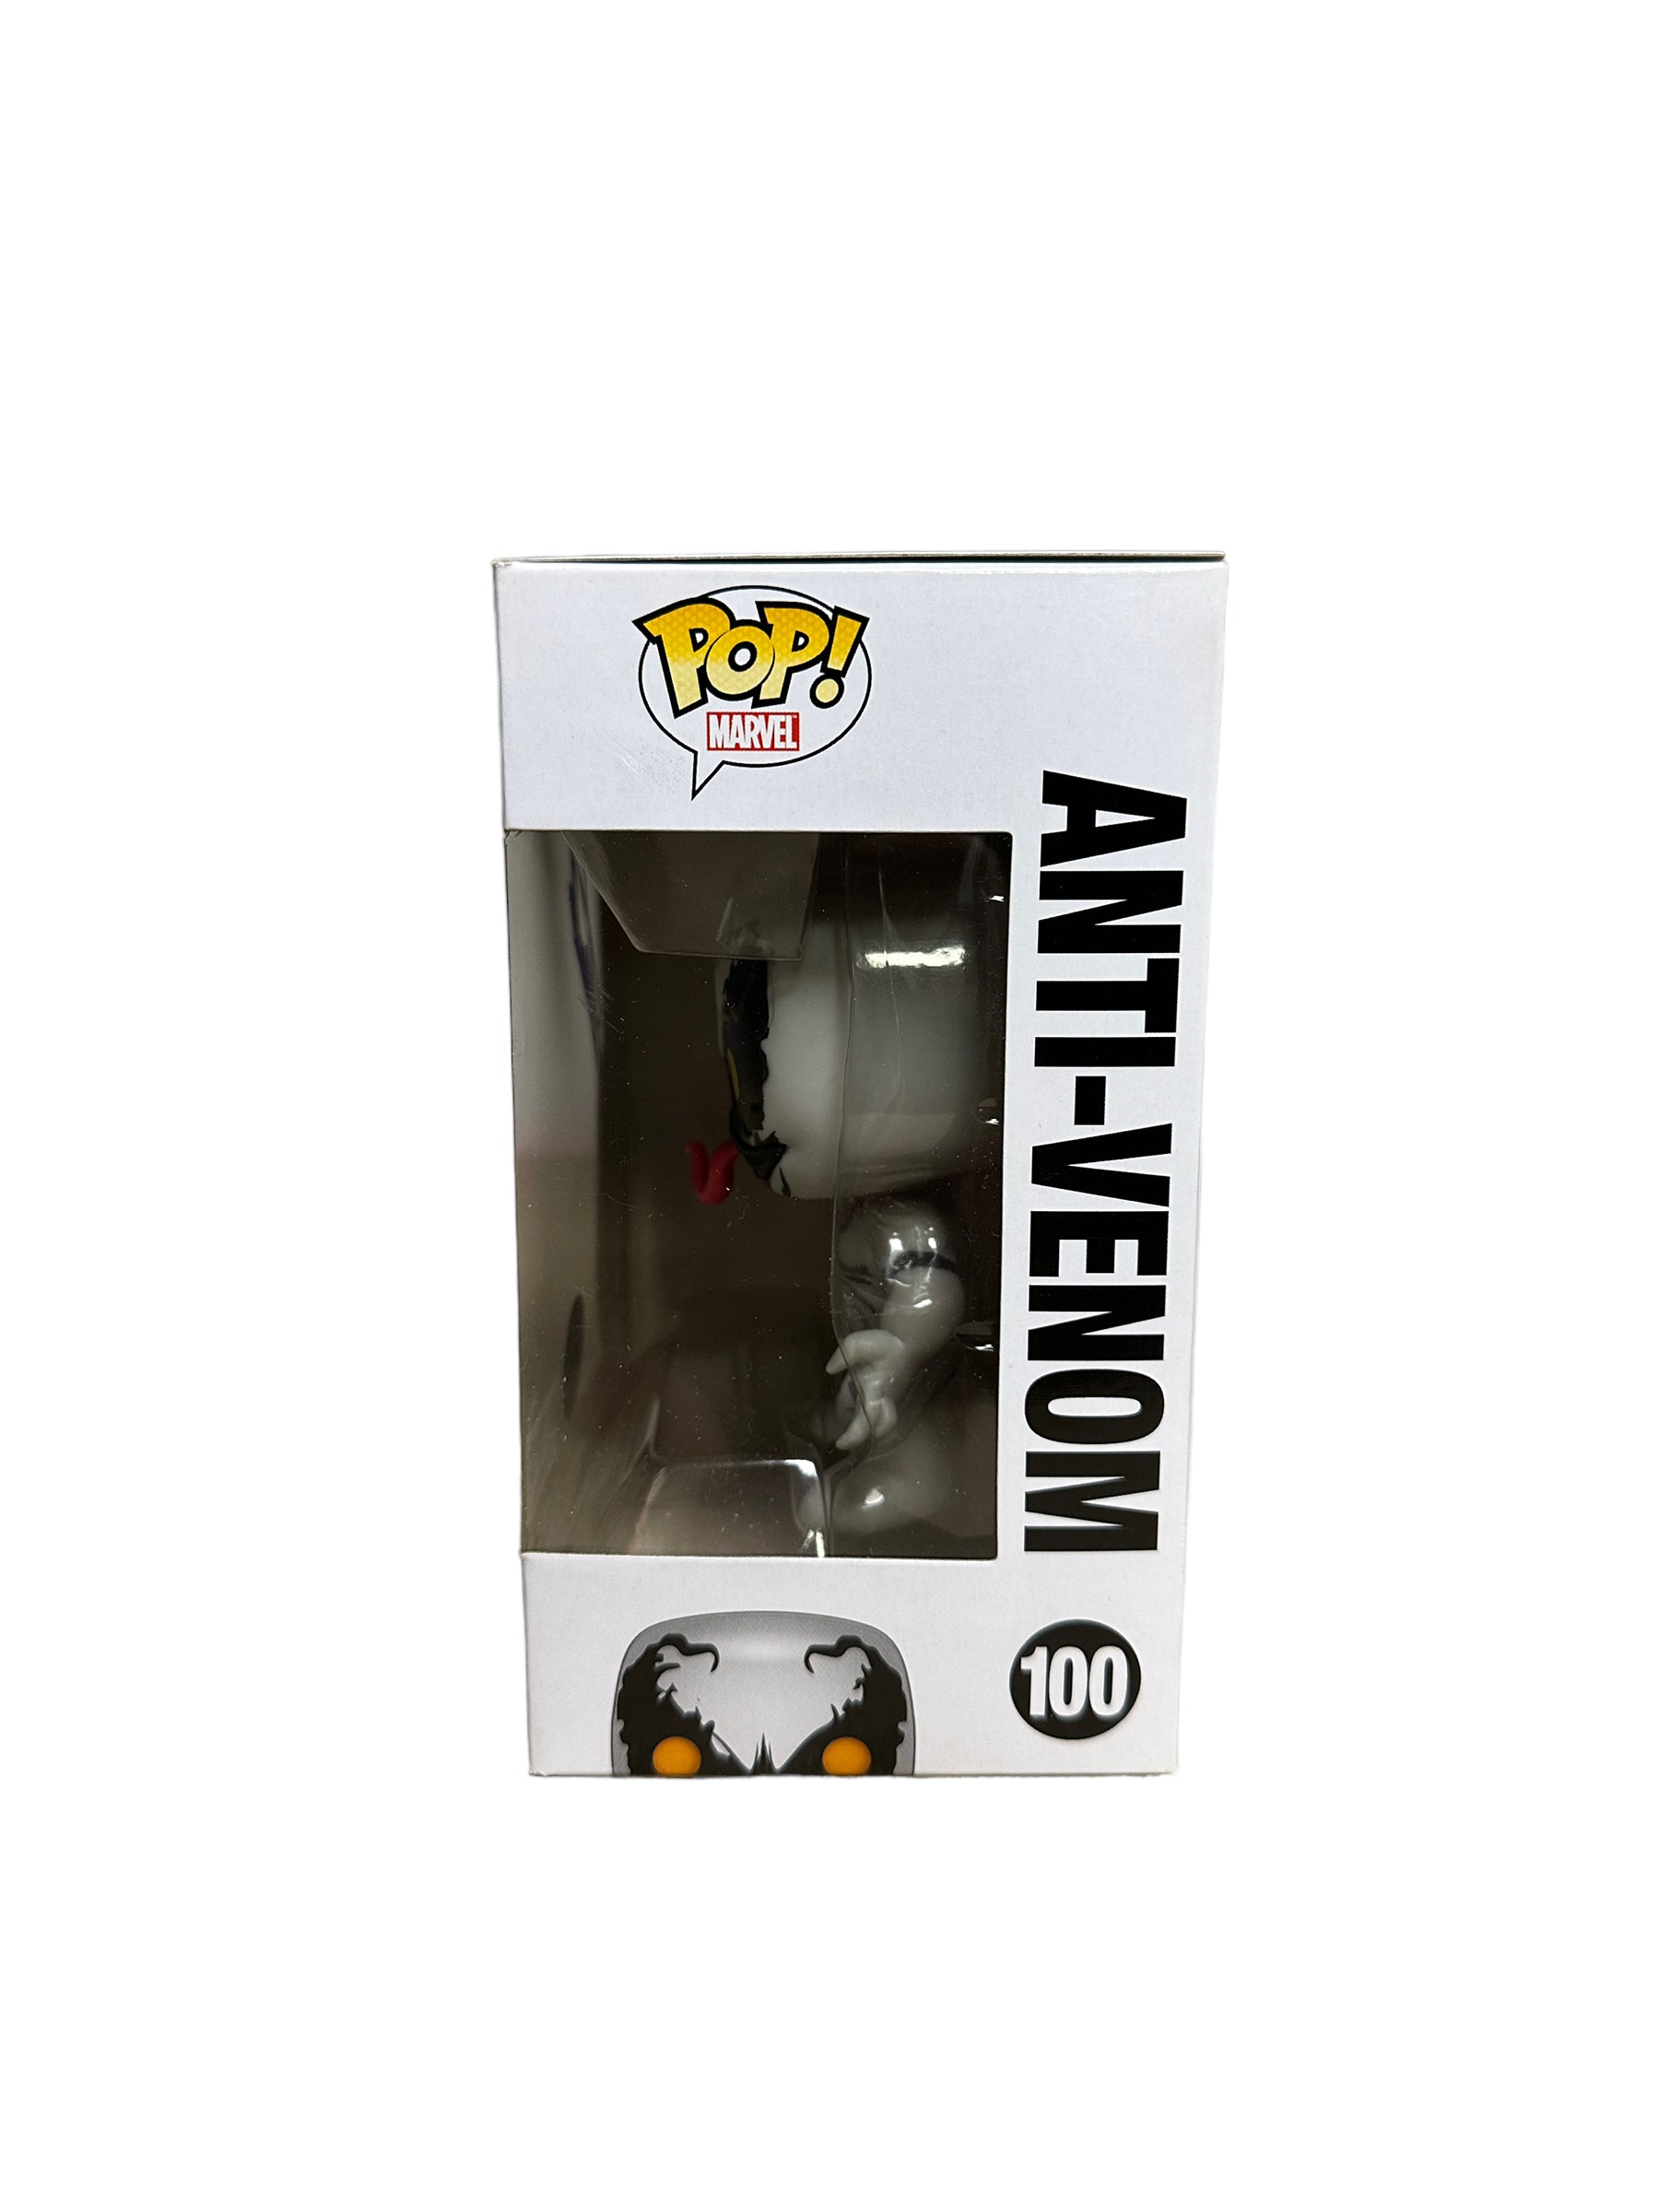 Stan Lee Signed Anti-Venom #100 Funko Pop! - Marvel - Hot Topic Exclusive - Condition 9.5/10 - Excelsior Approved